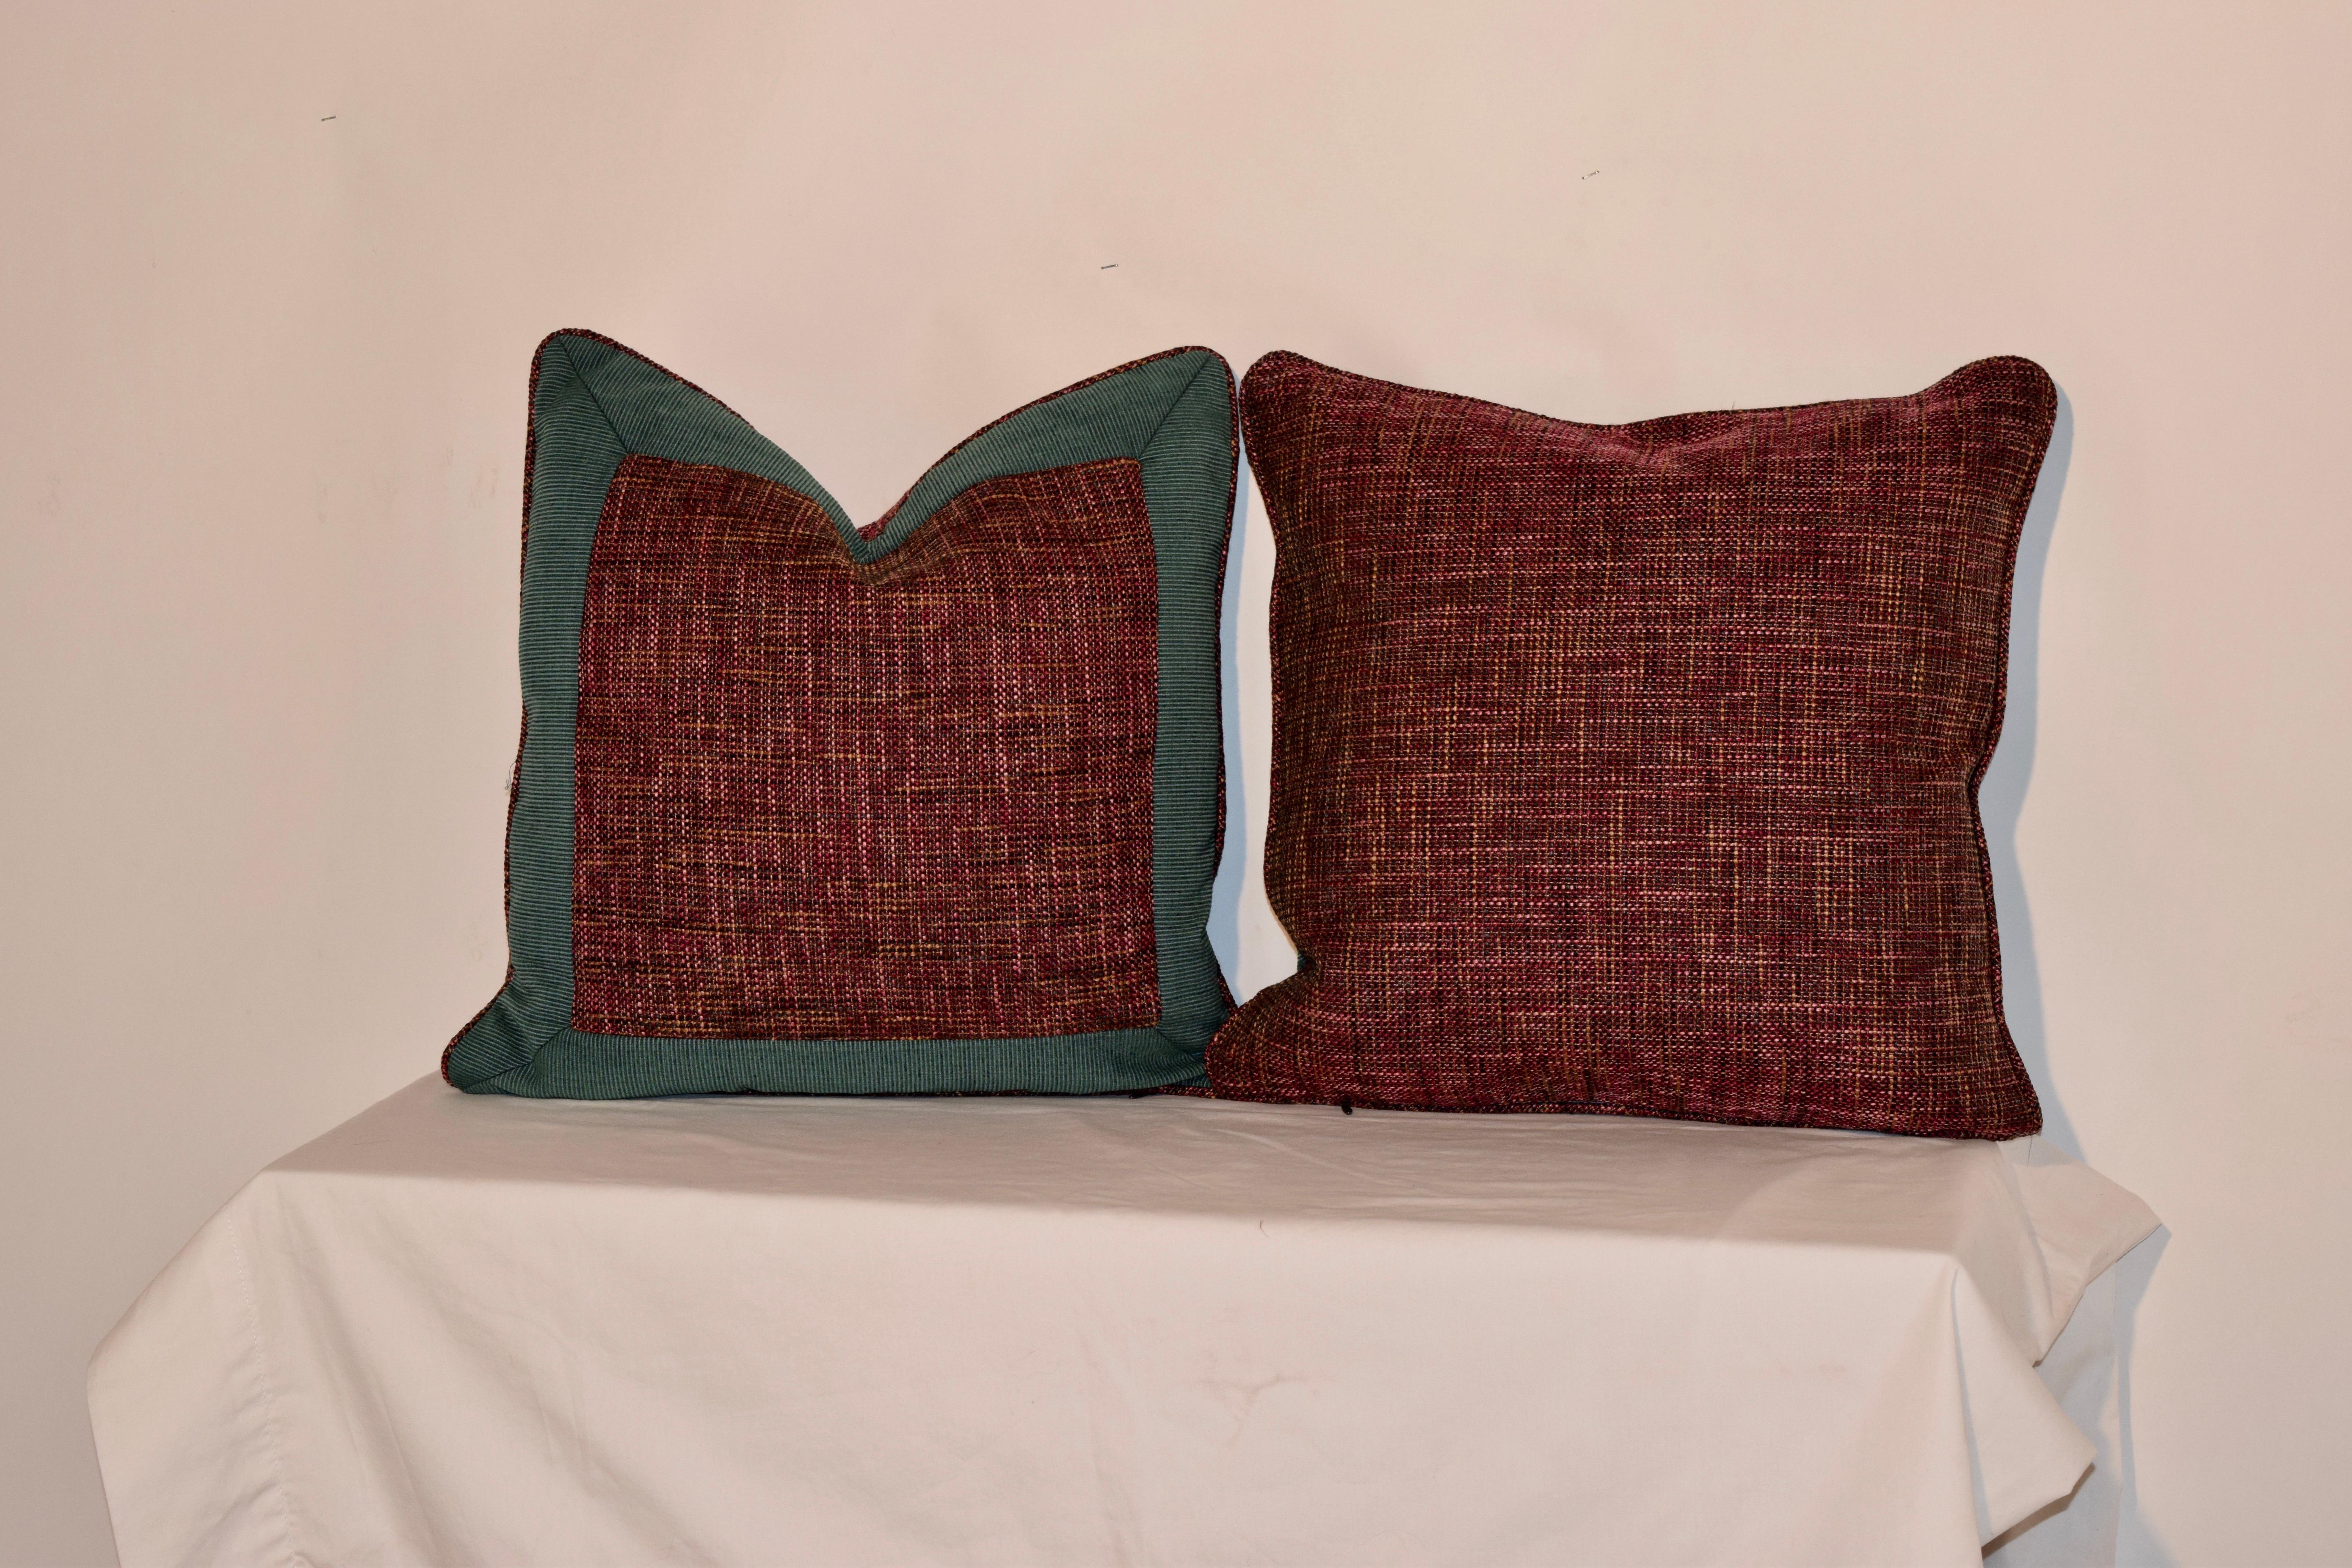 Hand-Crafted Handmade Bordered Pillows